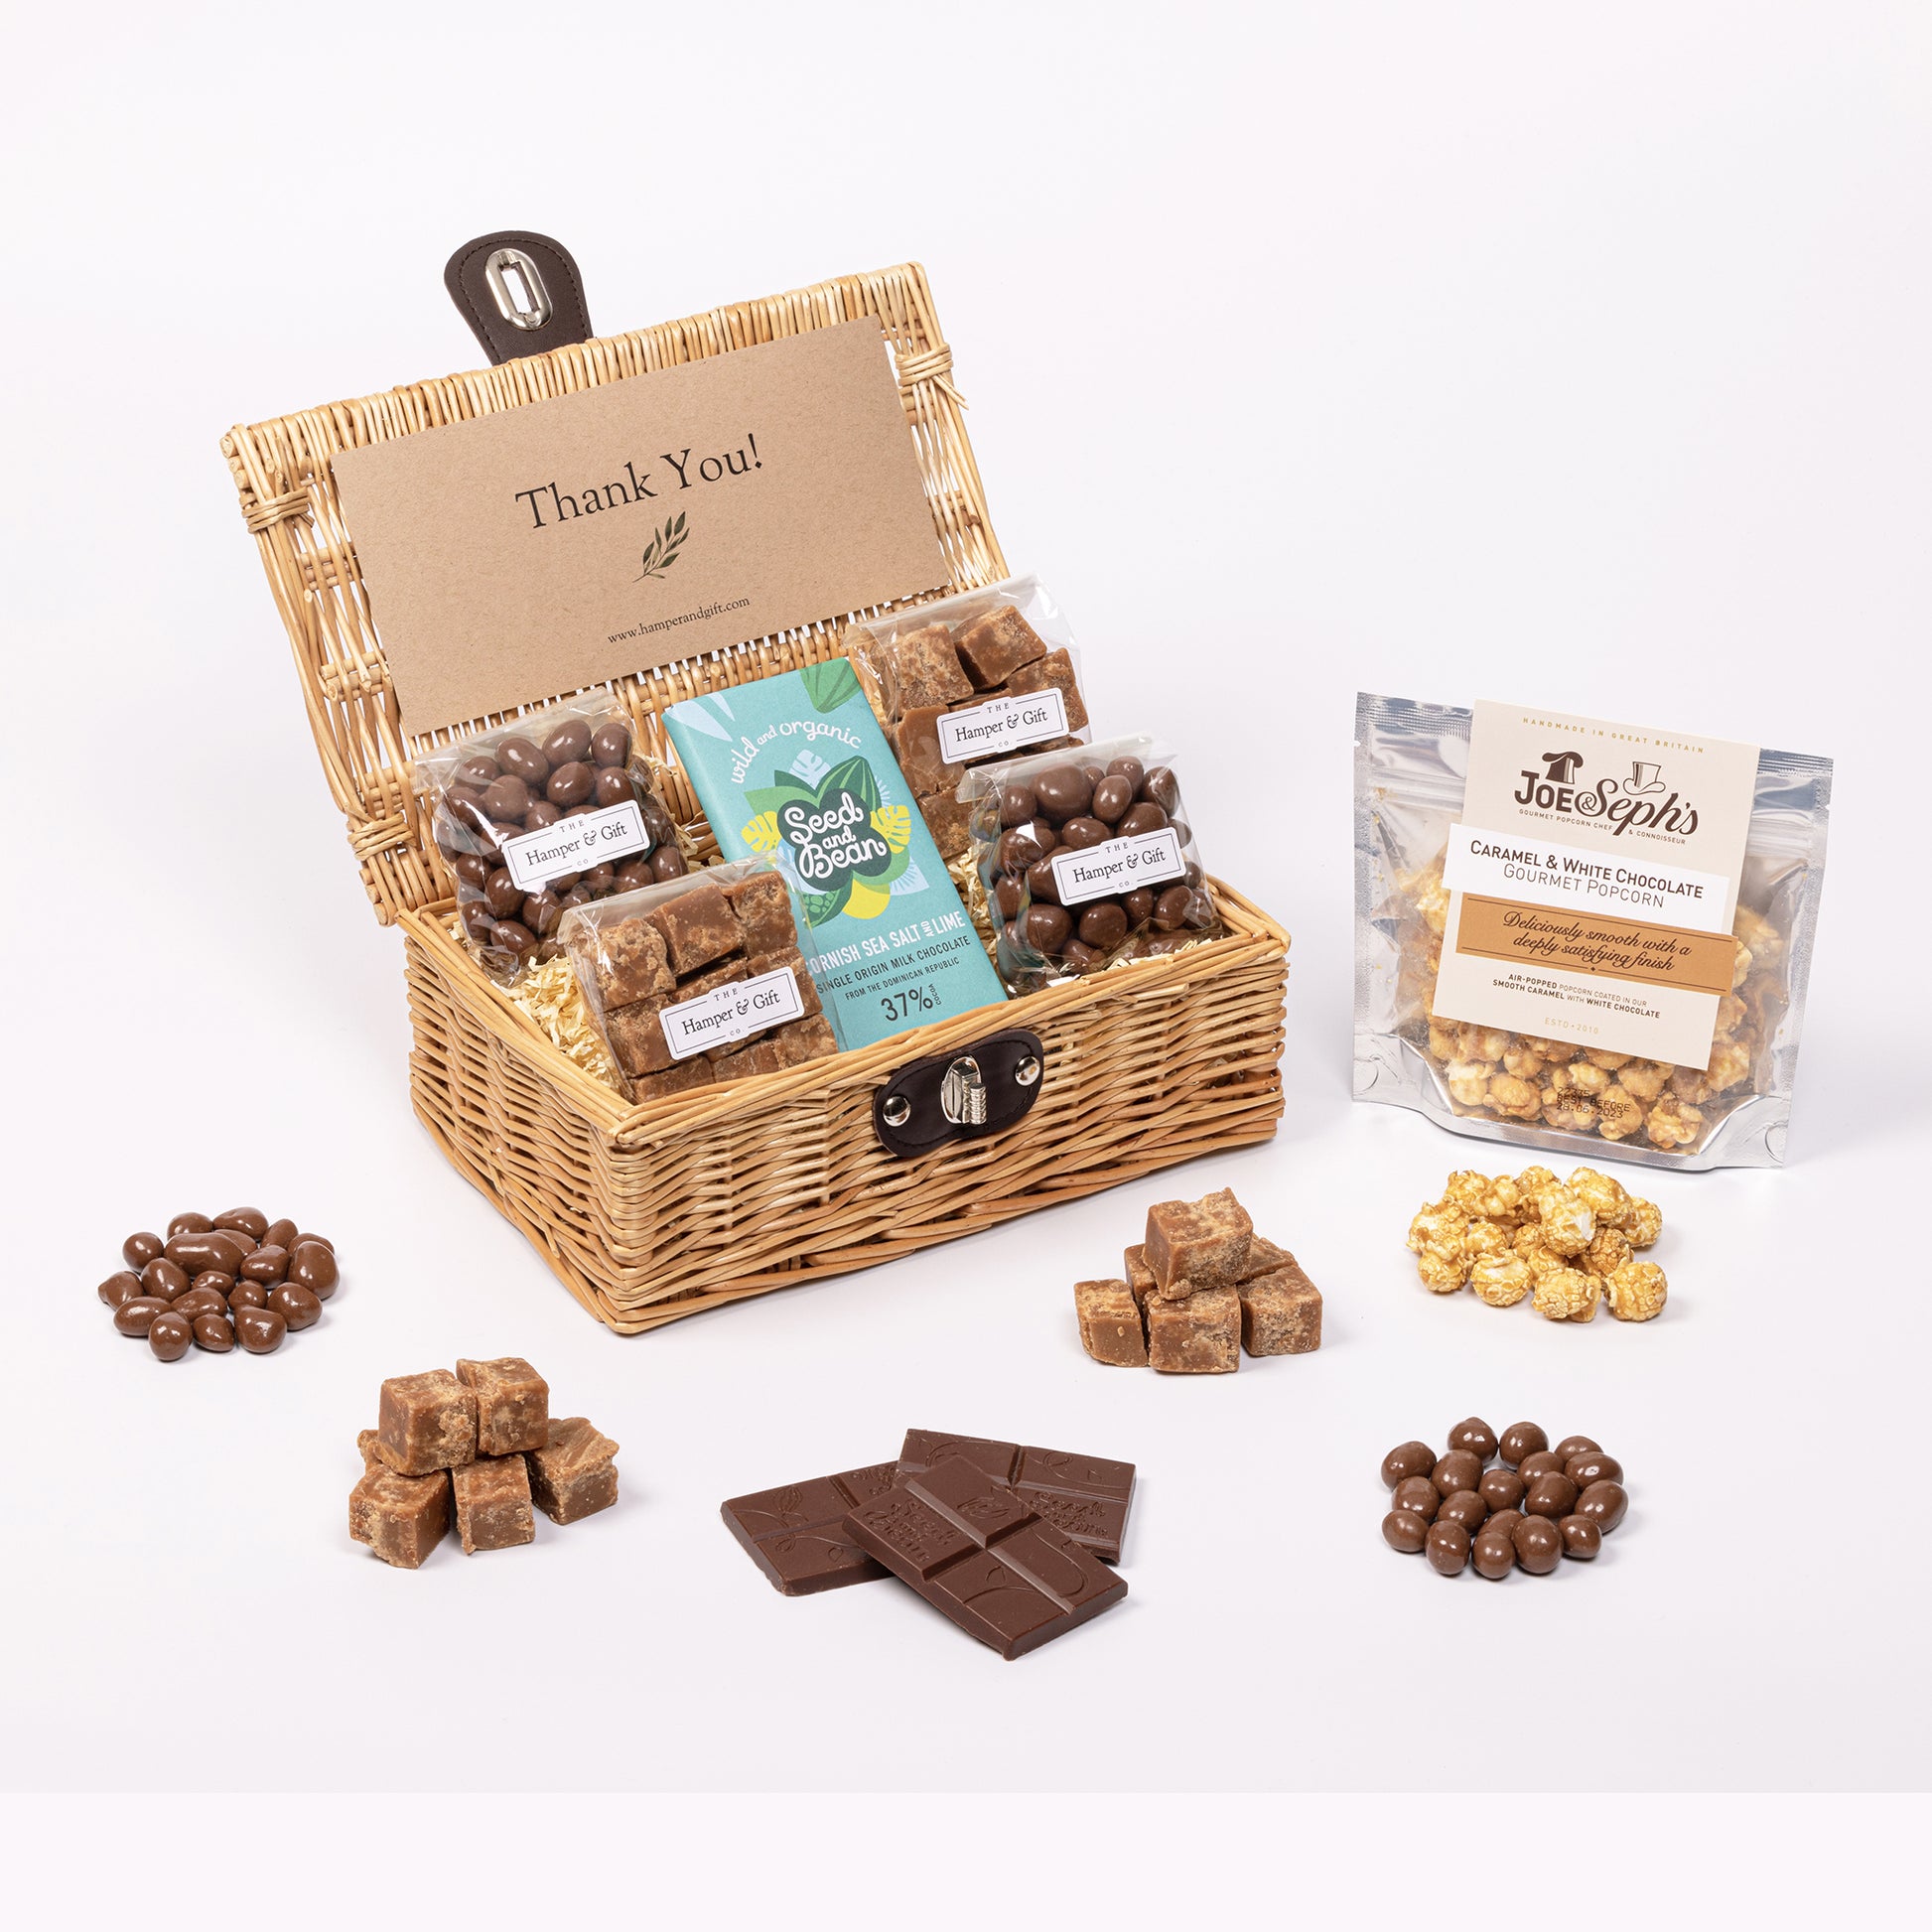 Thank You Hamper filled with chocolate, fudge and gourmet popcorn